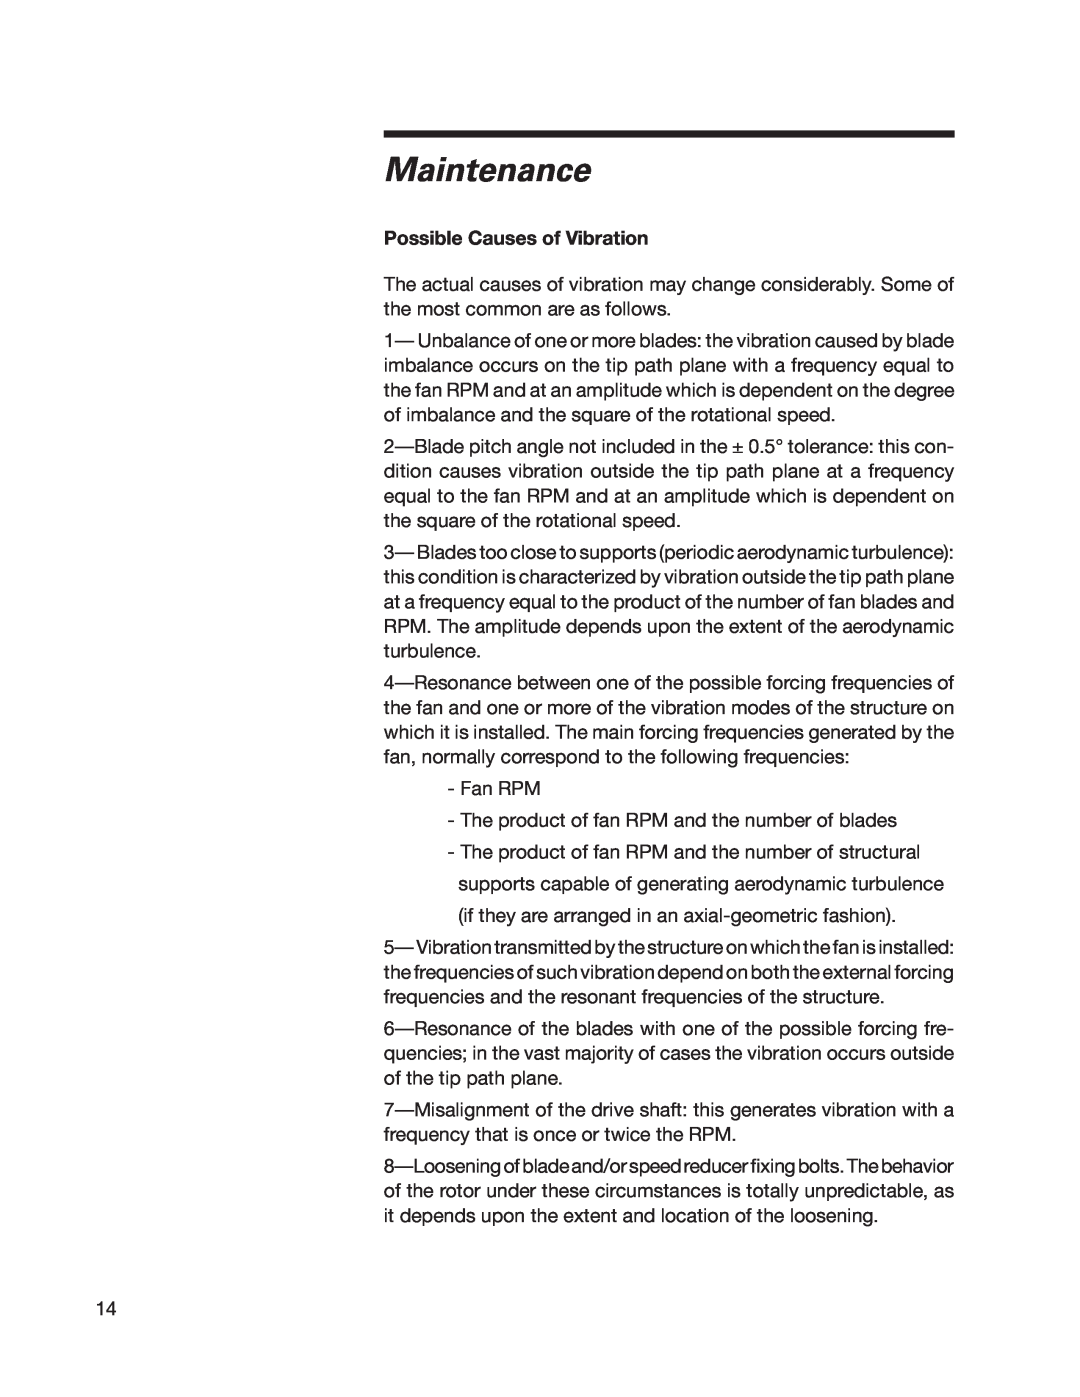 SPX Cooling Technologies 07-1126 user manual Possible Causes of Vibration, Maintenance 